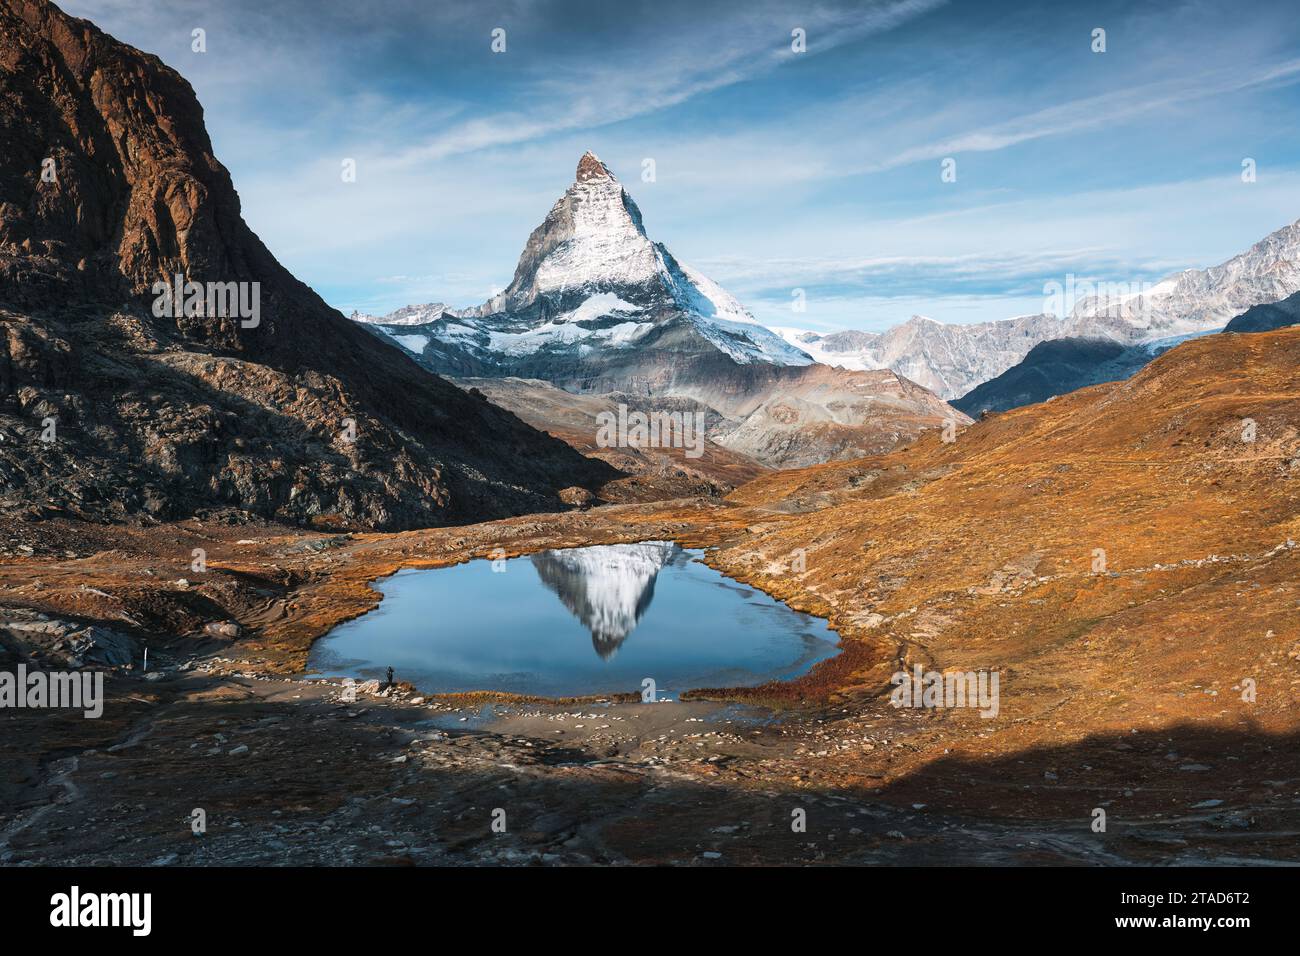 Beautiful landscape of Riffelsee lake and Matterhorn iconic mountain reflection in the morning at canton of Valais, Switzerland Stock Photo